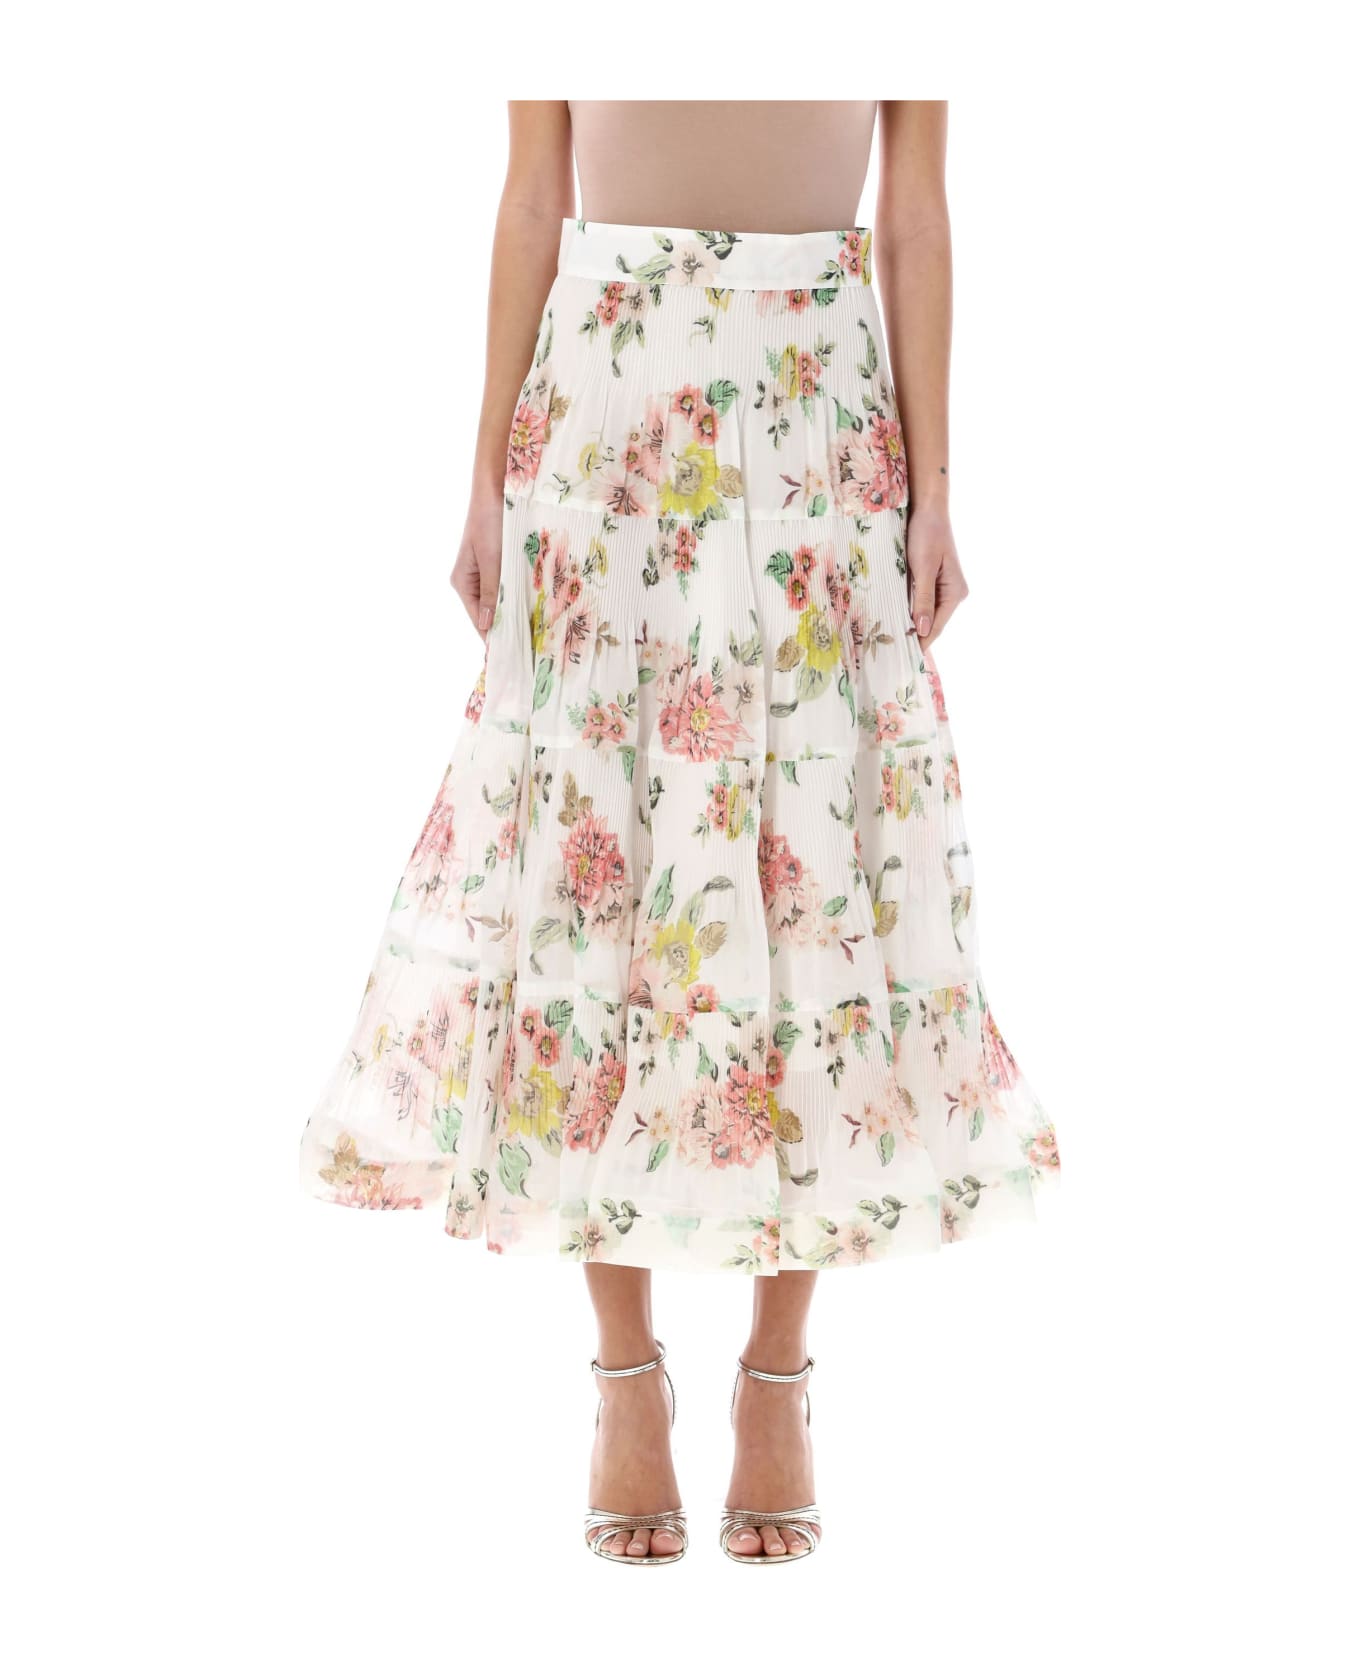 Zimmermann Pleated Midi Skirt - IVORY CORAL FLORAL スカート